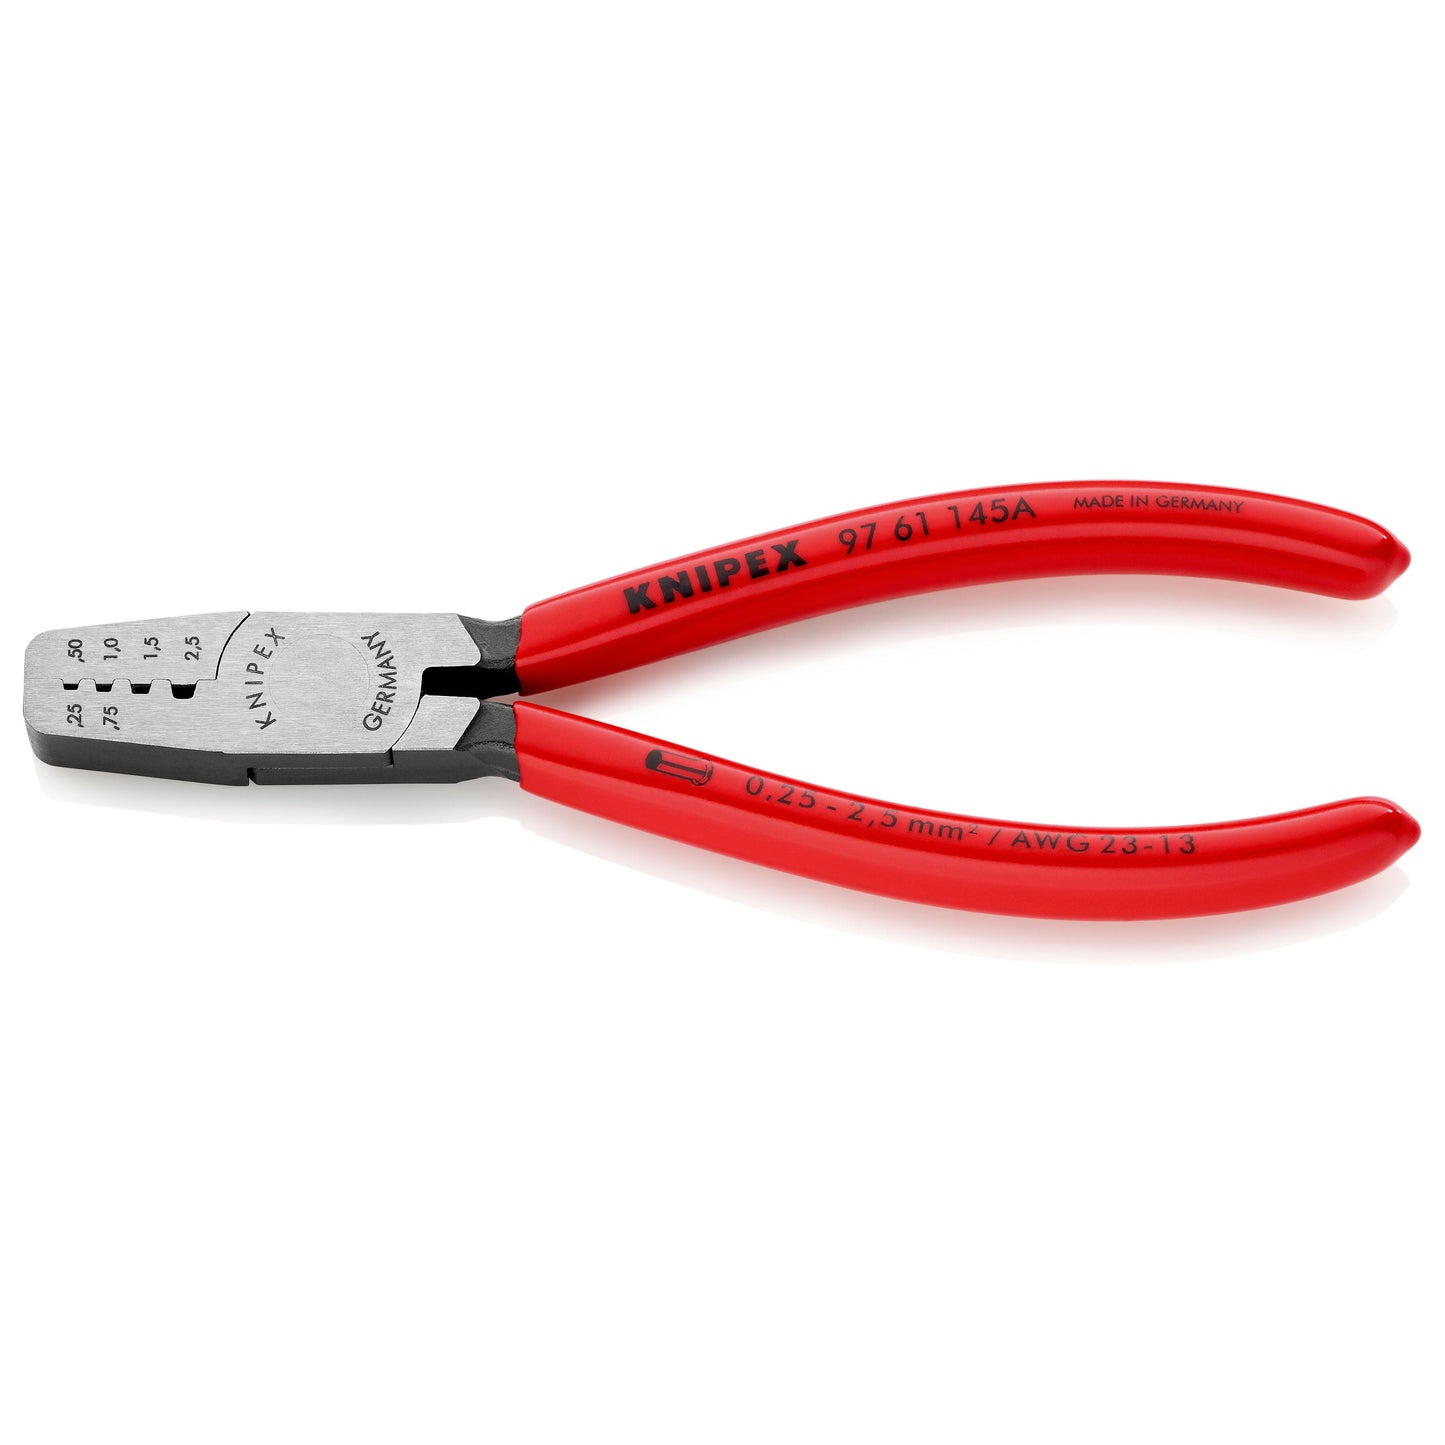 Knipex 97 61 145 A - 145 mm ferrule notching pliers with PVC handles